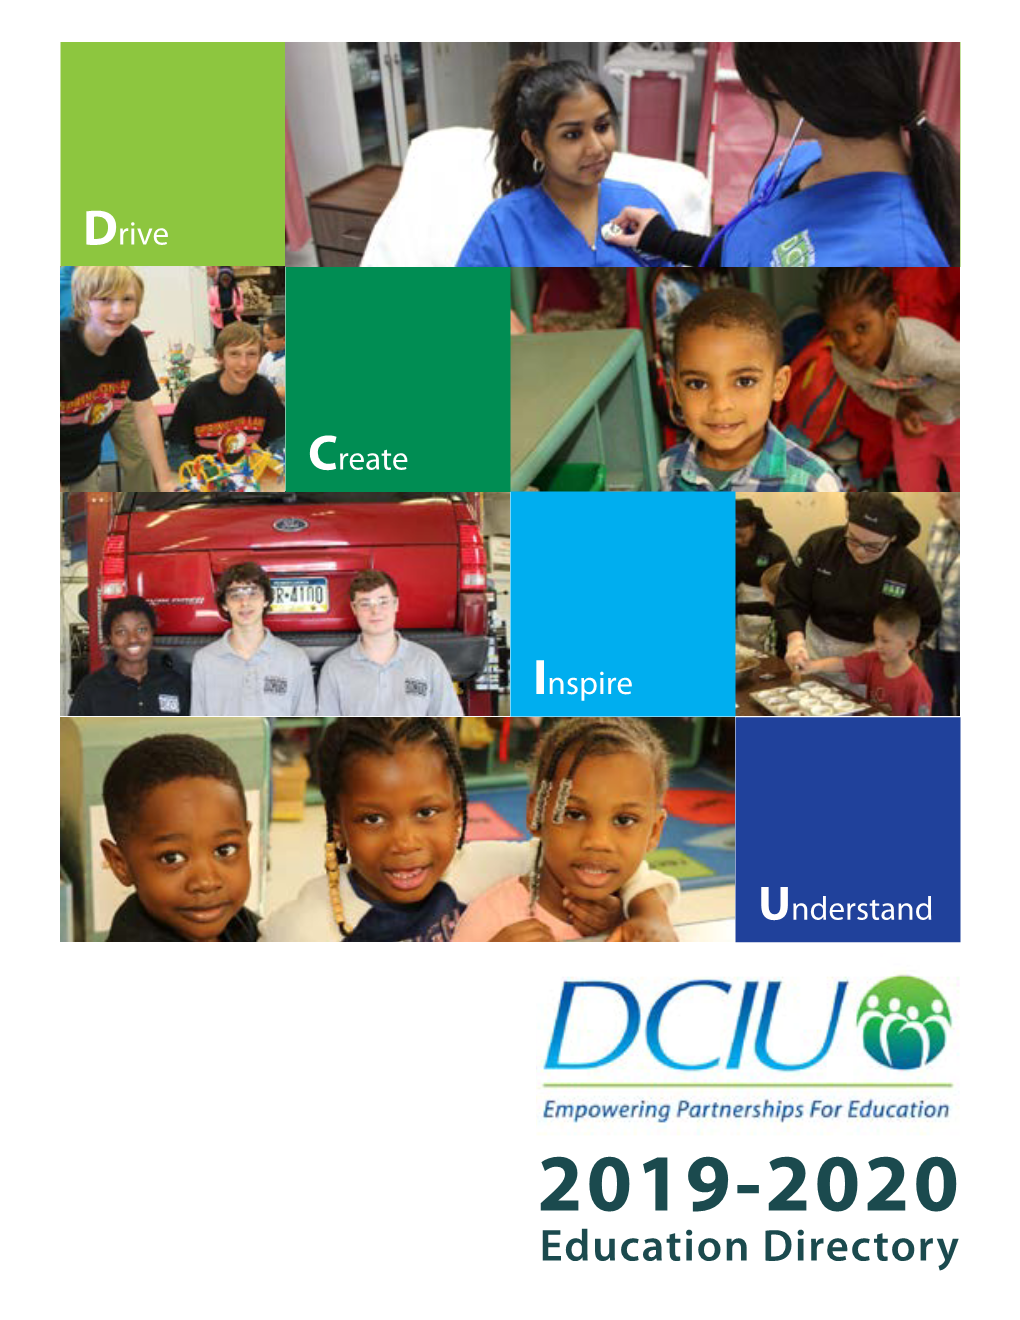 View the 2019-2020 DCIU Education Directory